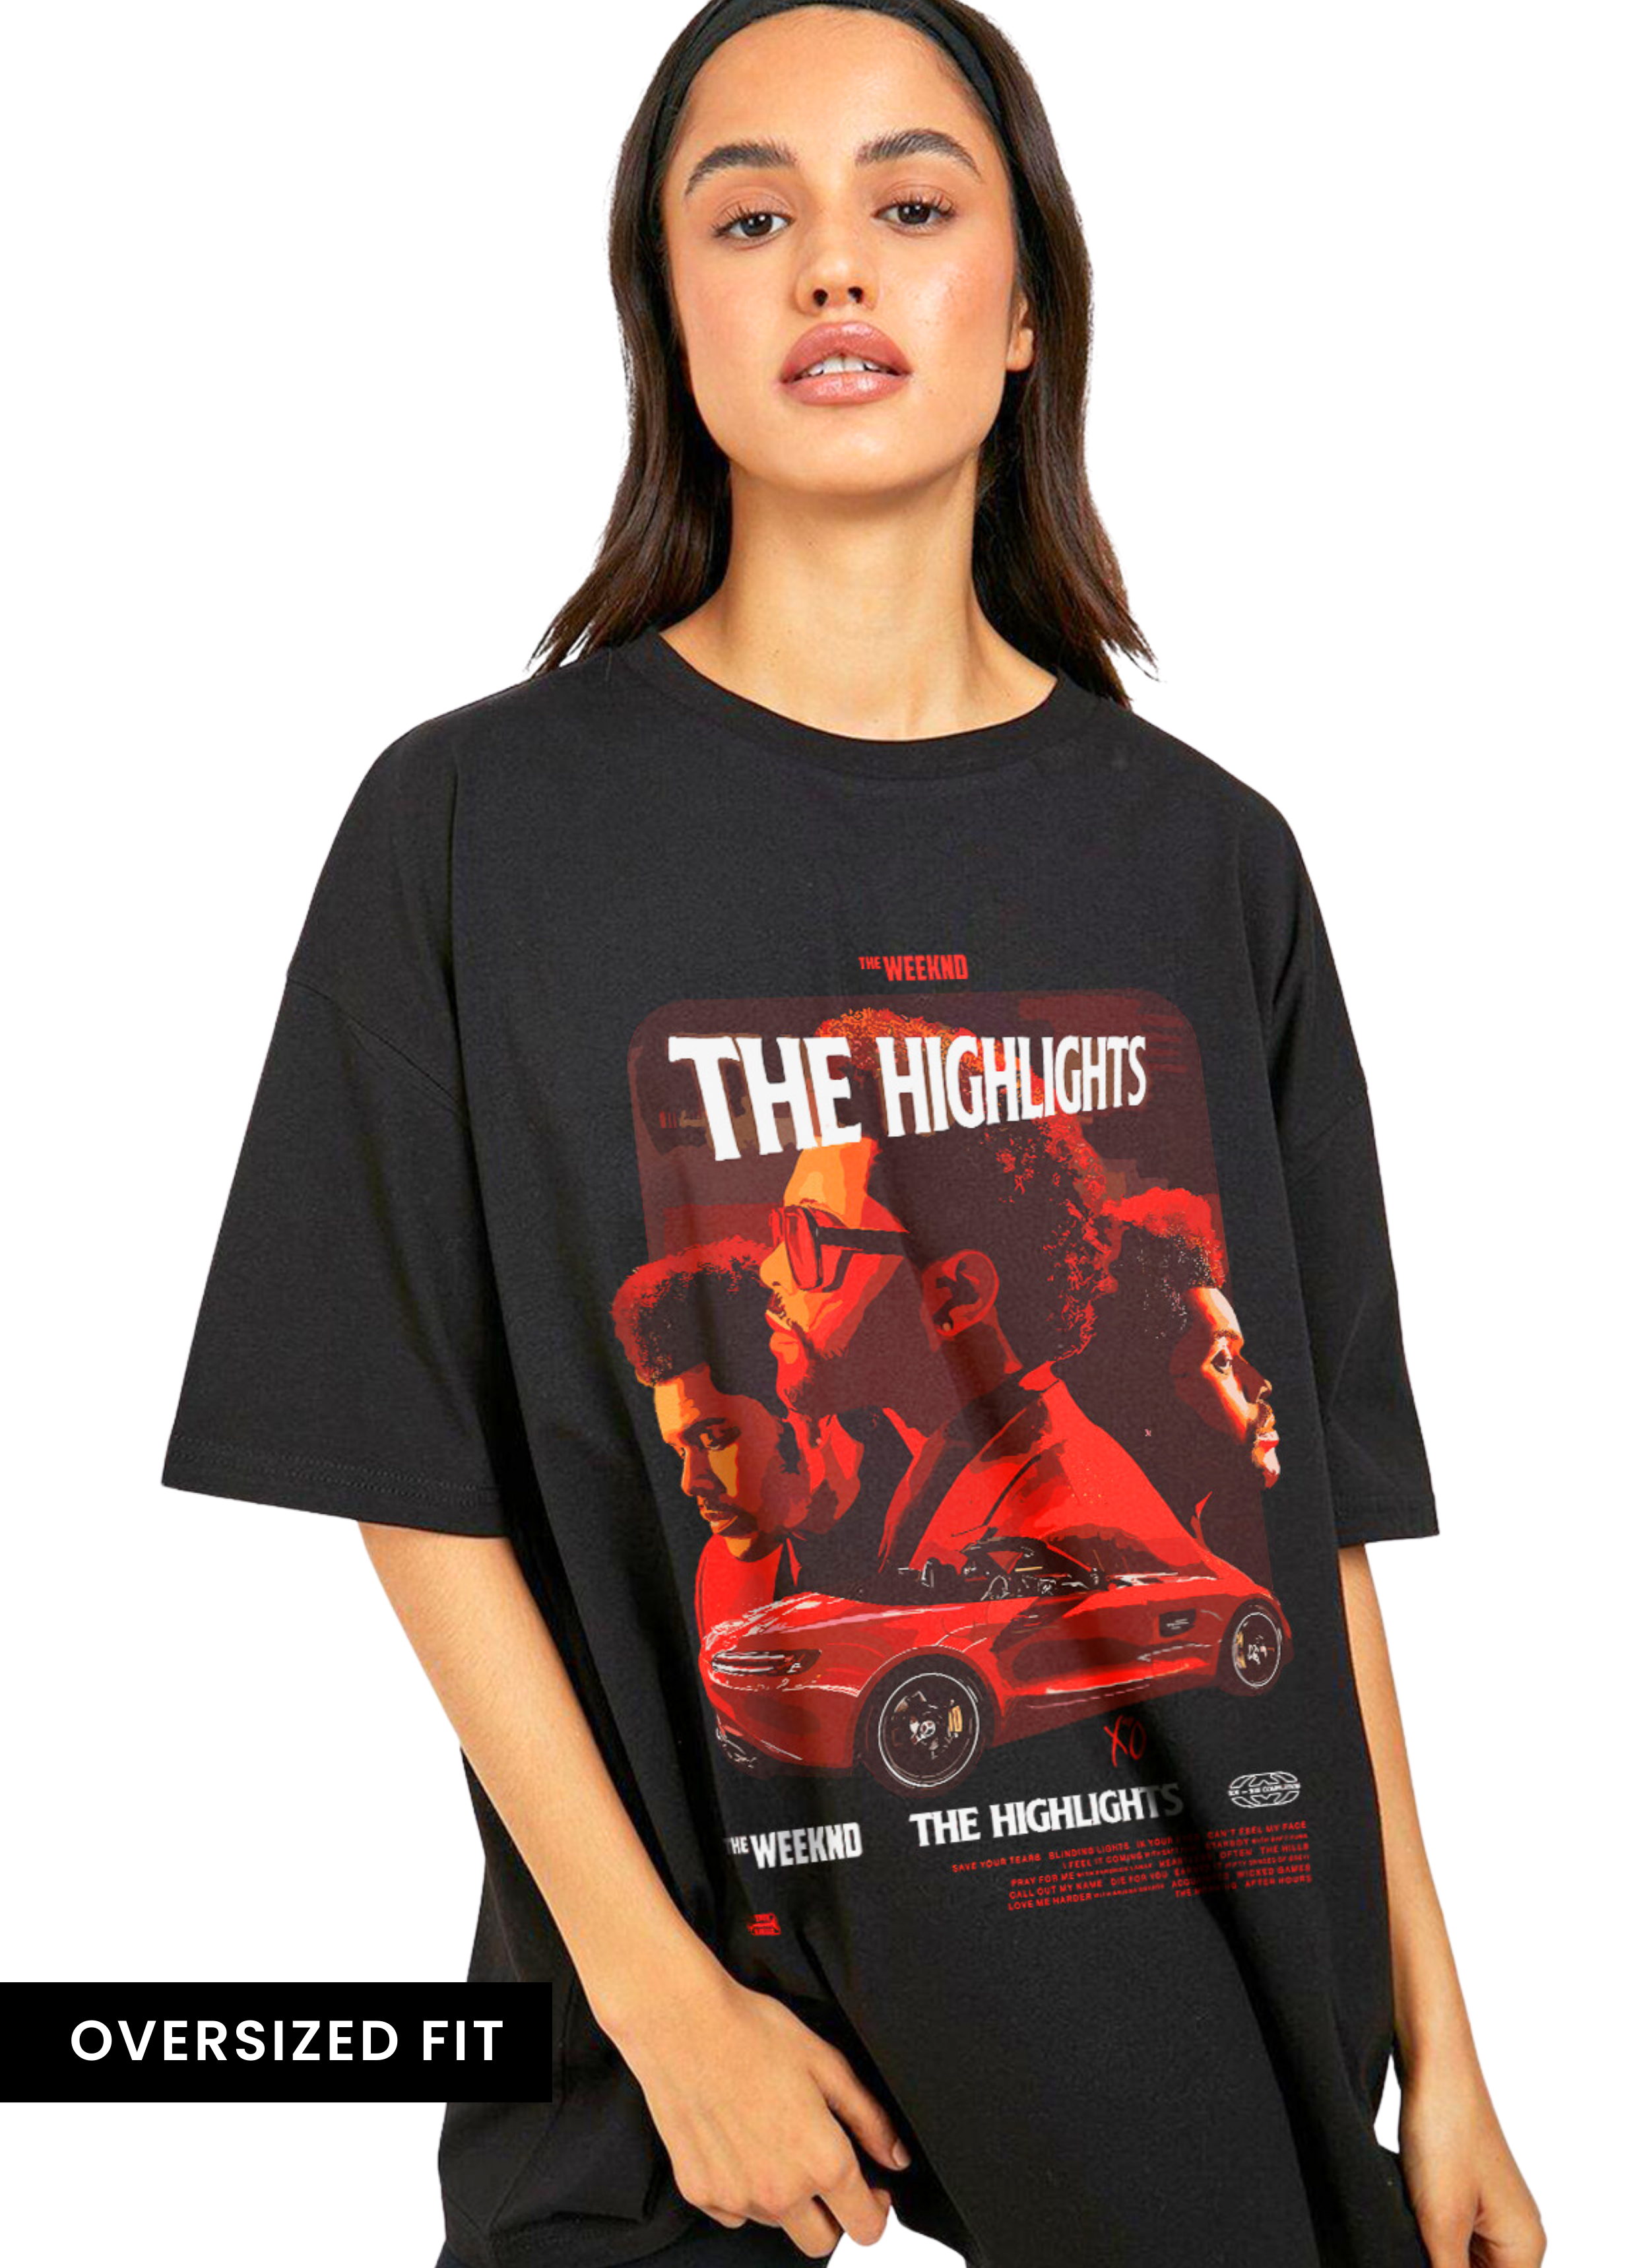 The Weeknd The Highlights Oversized Front Unisex Tshirt